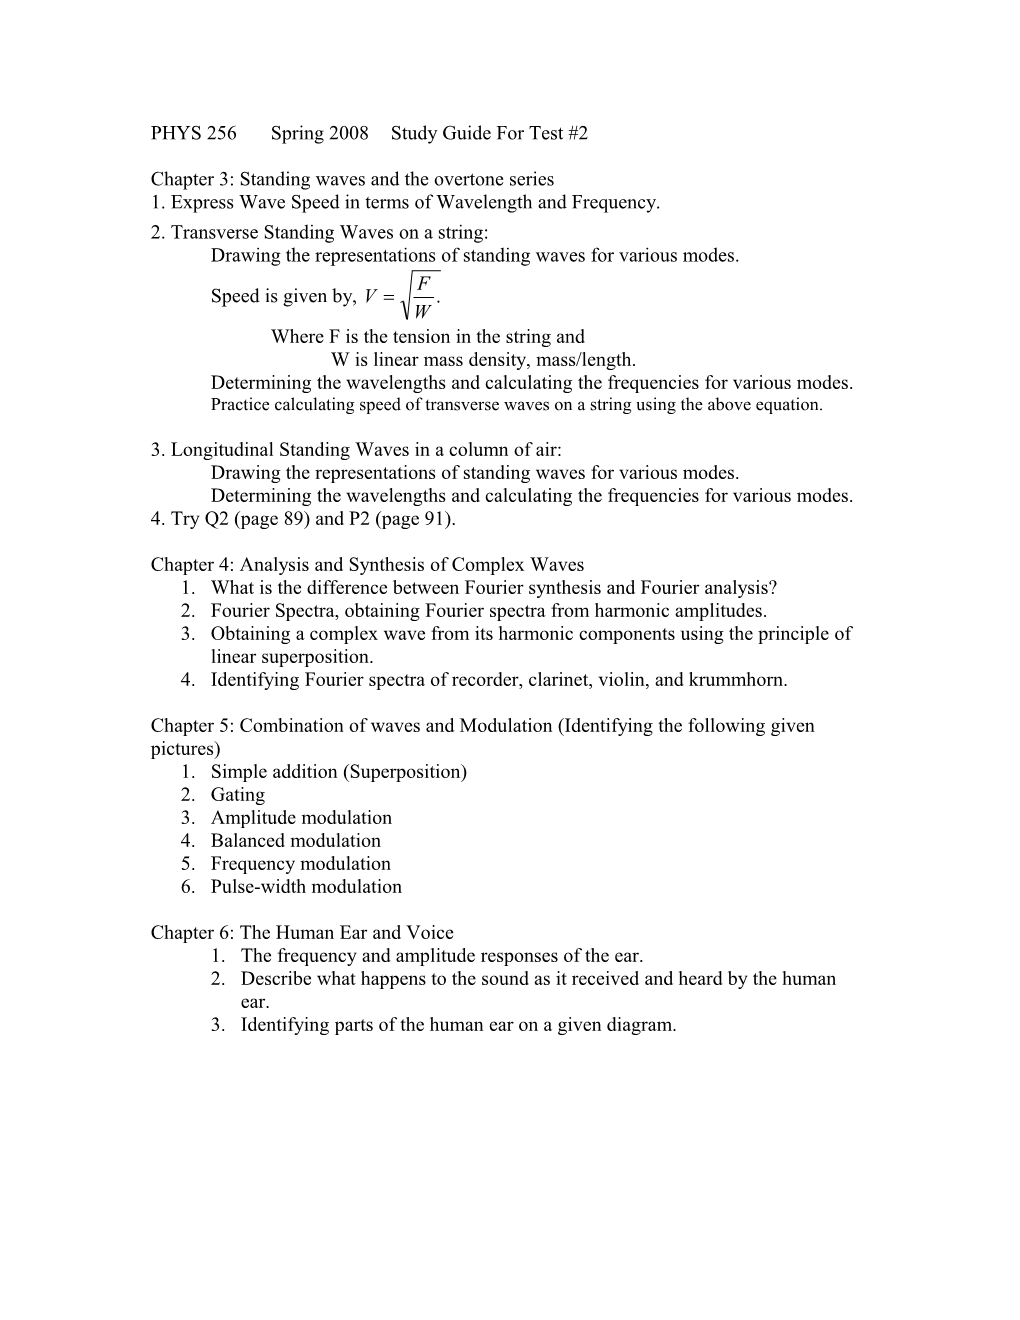 PHYS 256Spring 2008Study Guide for Test #2